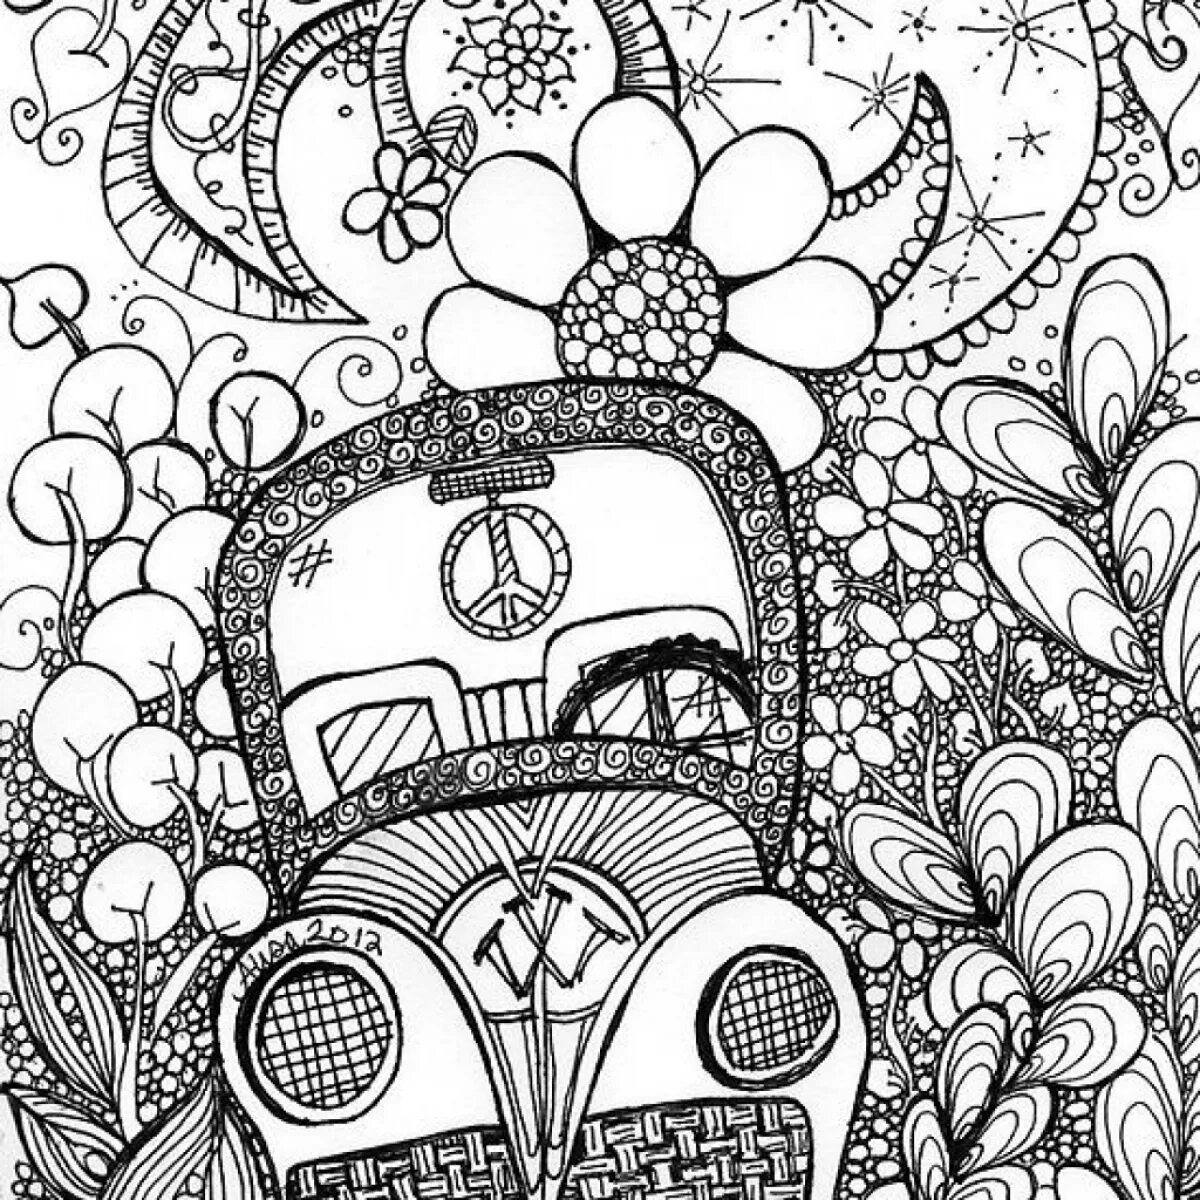 Sublime antistress coloring book